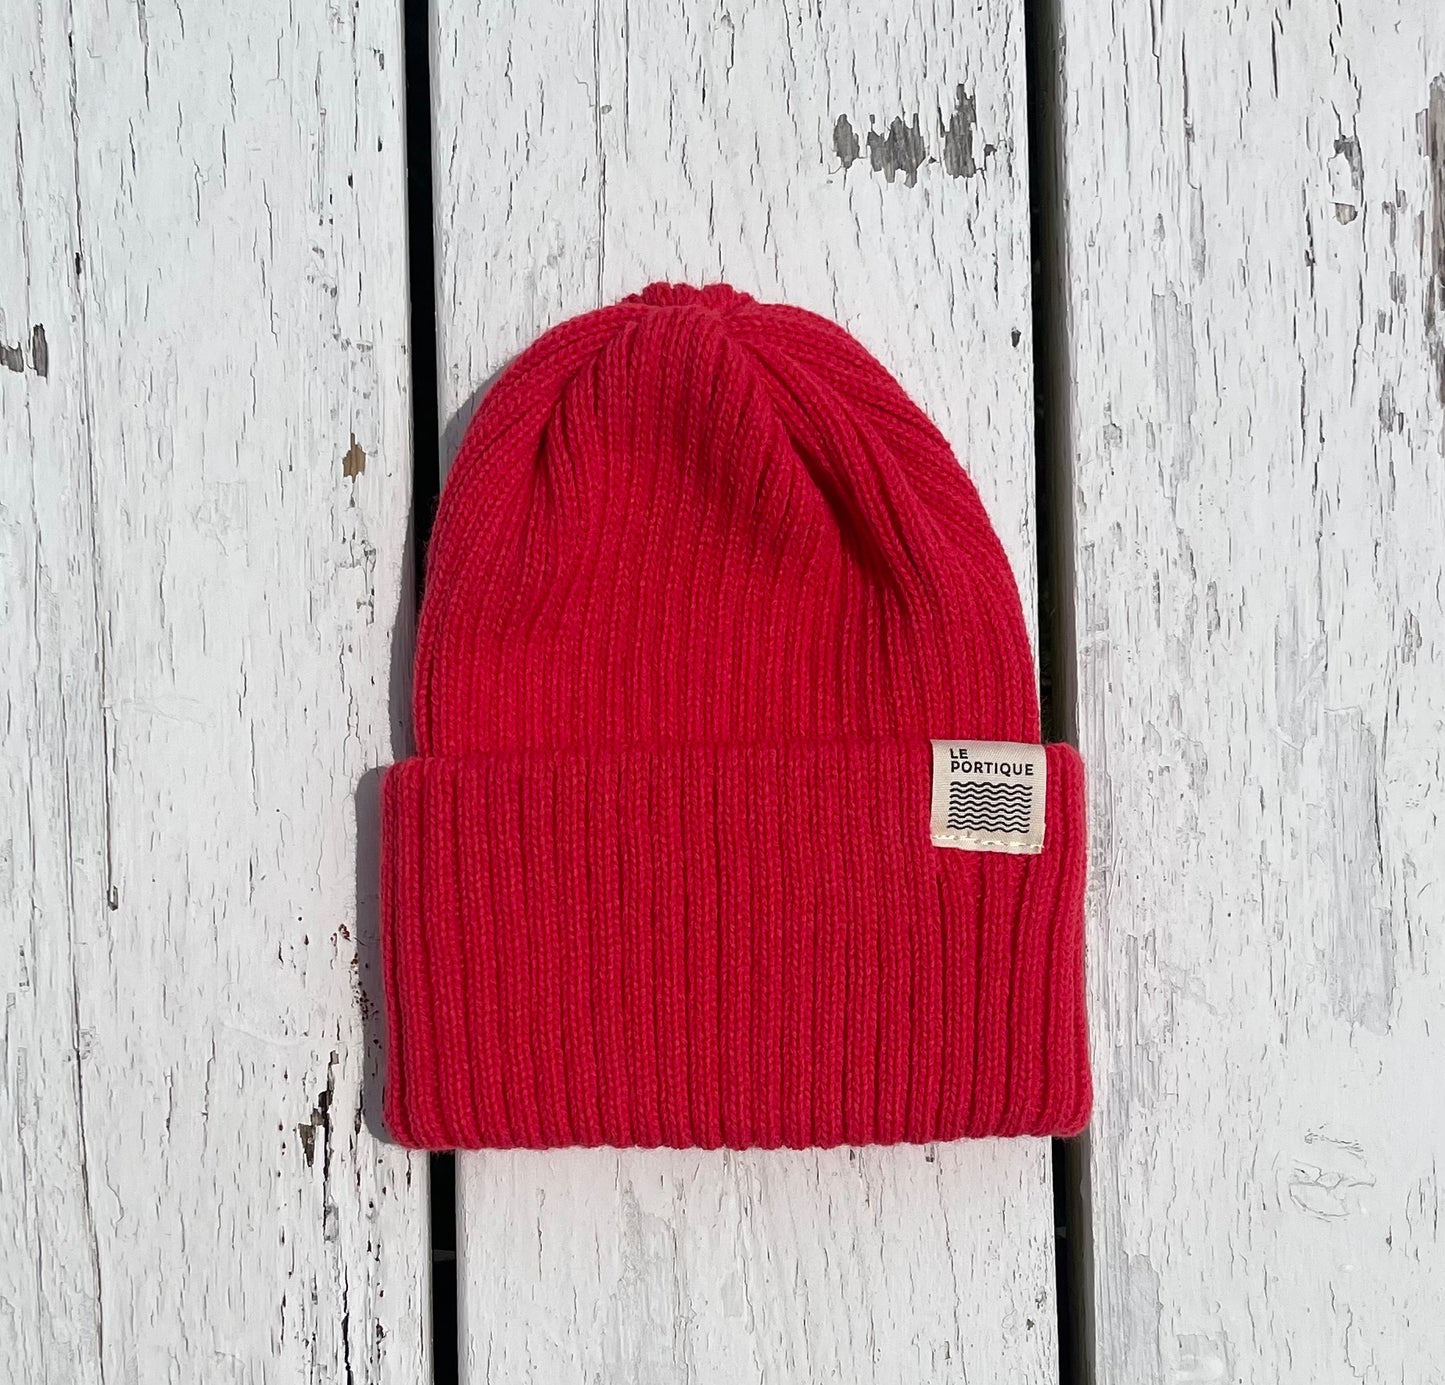 Tuque maritime adulte rouge